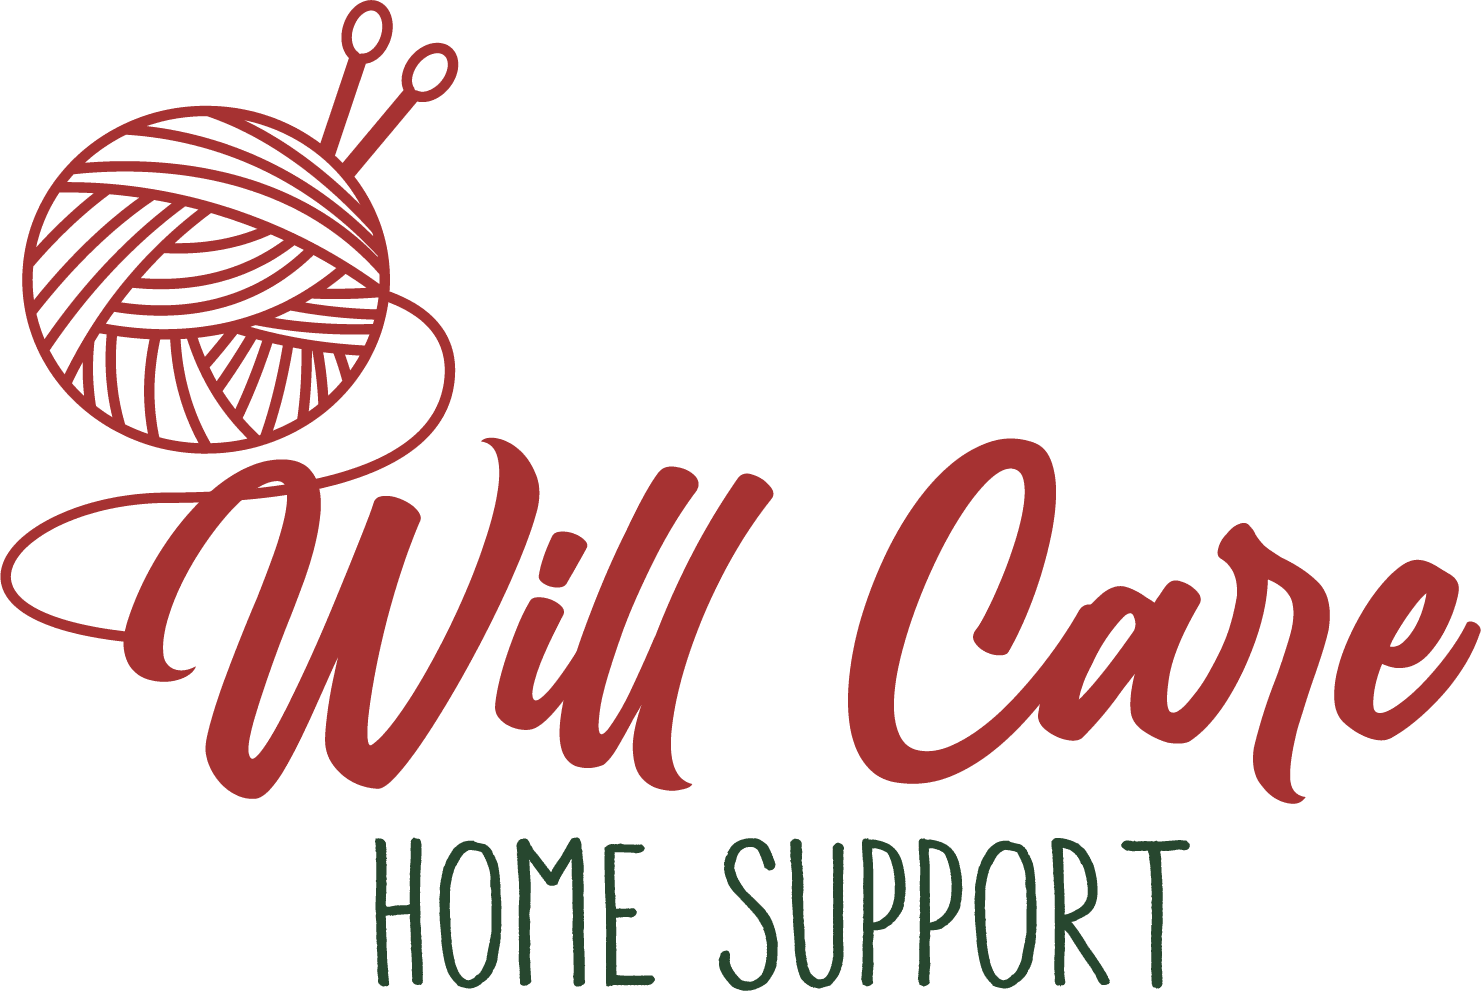 Will Care Home Support Logo